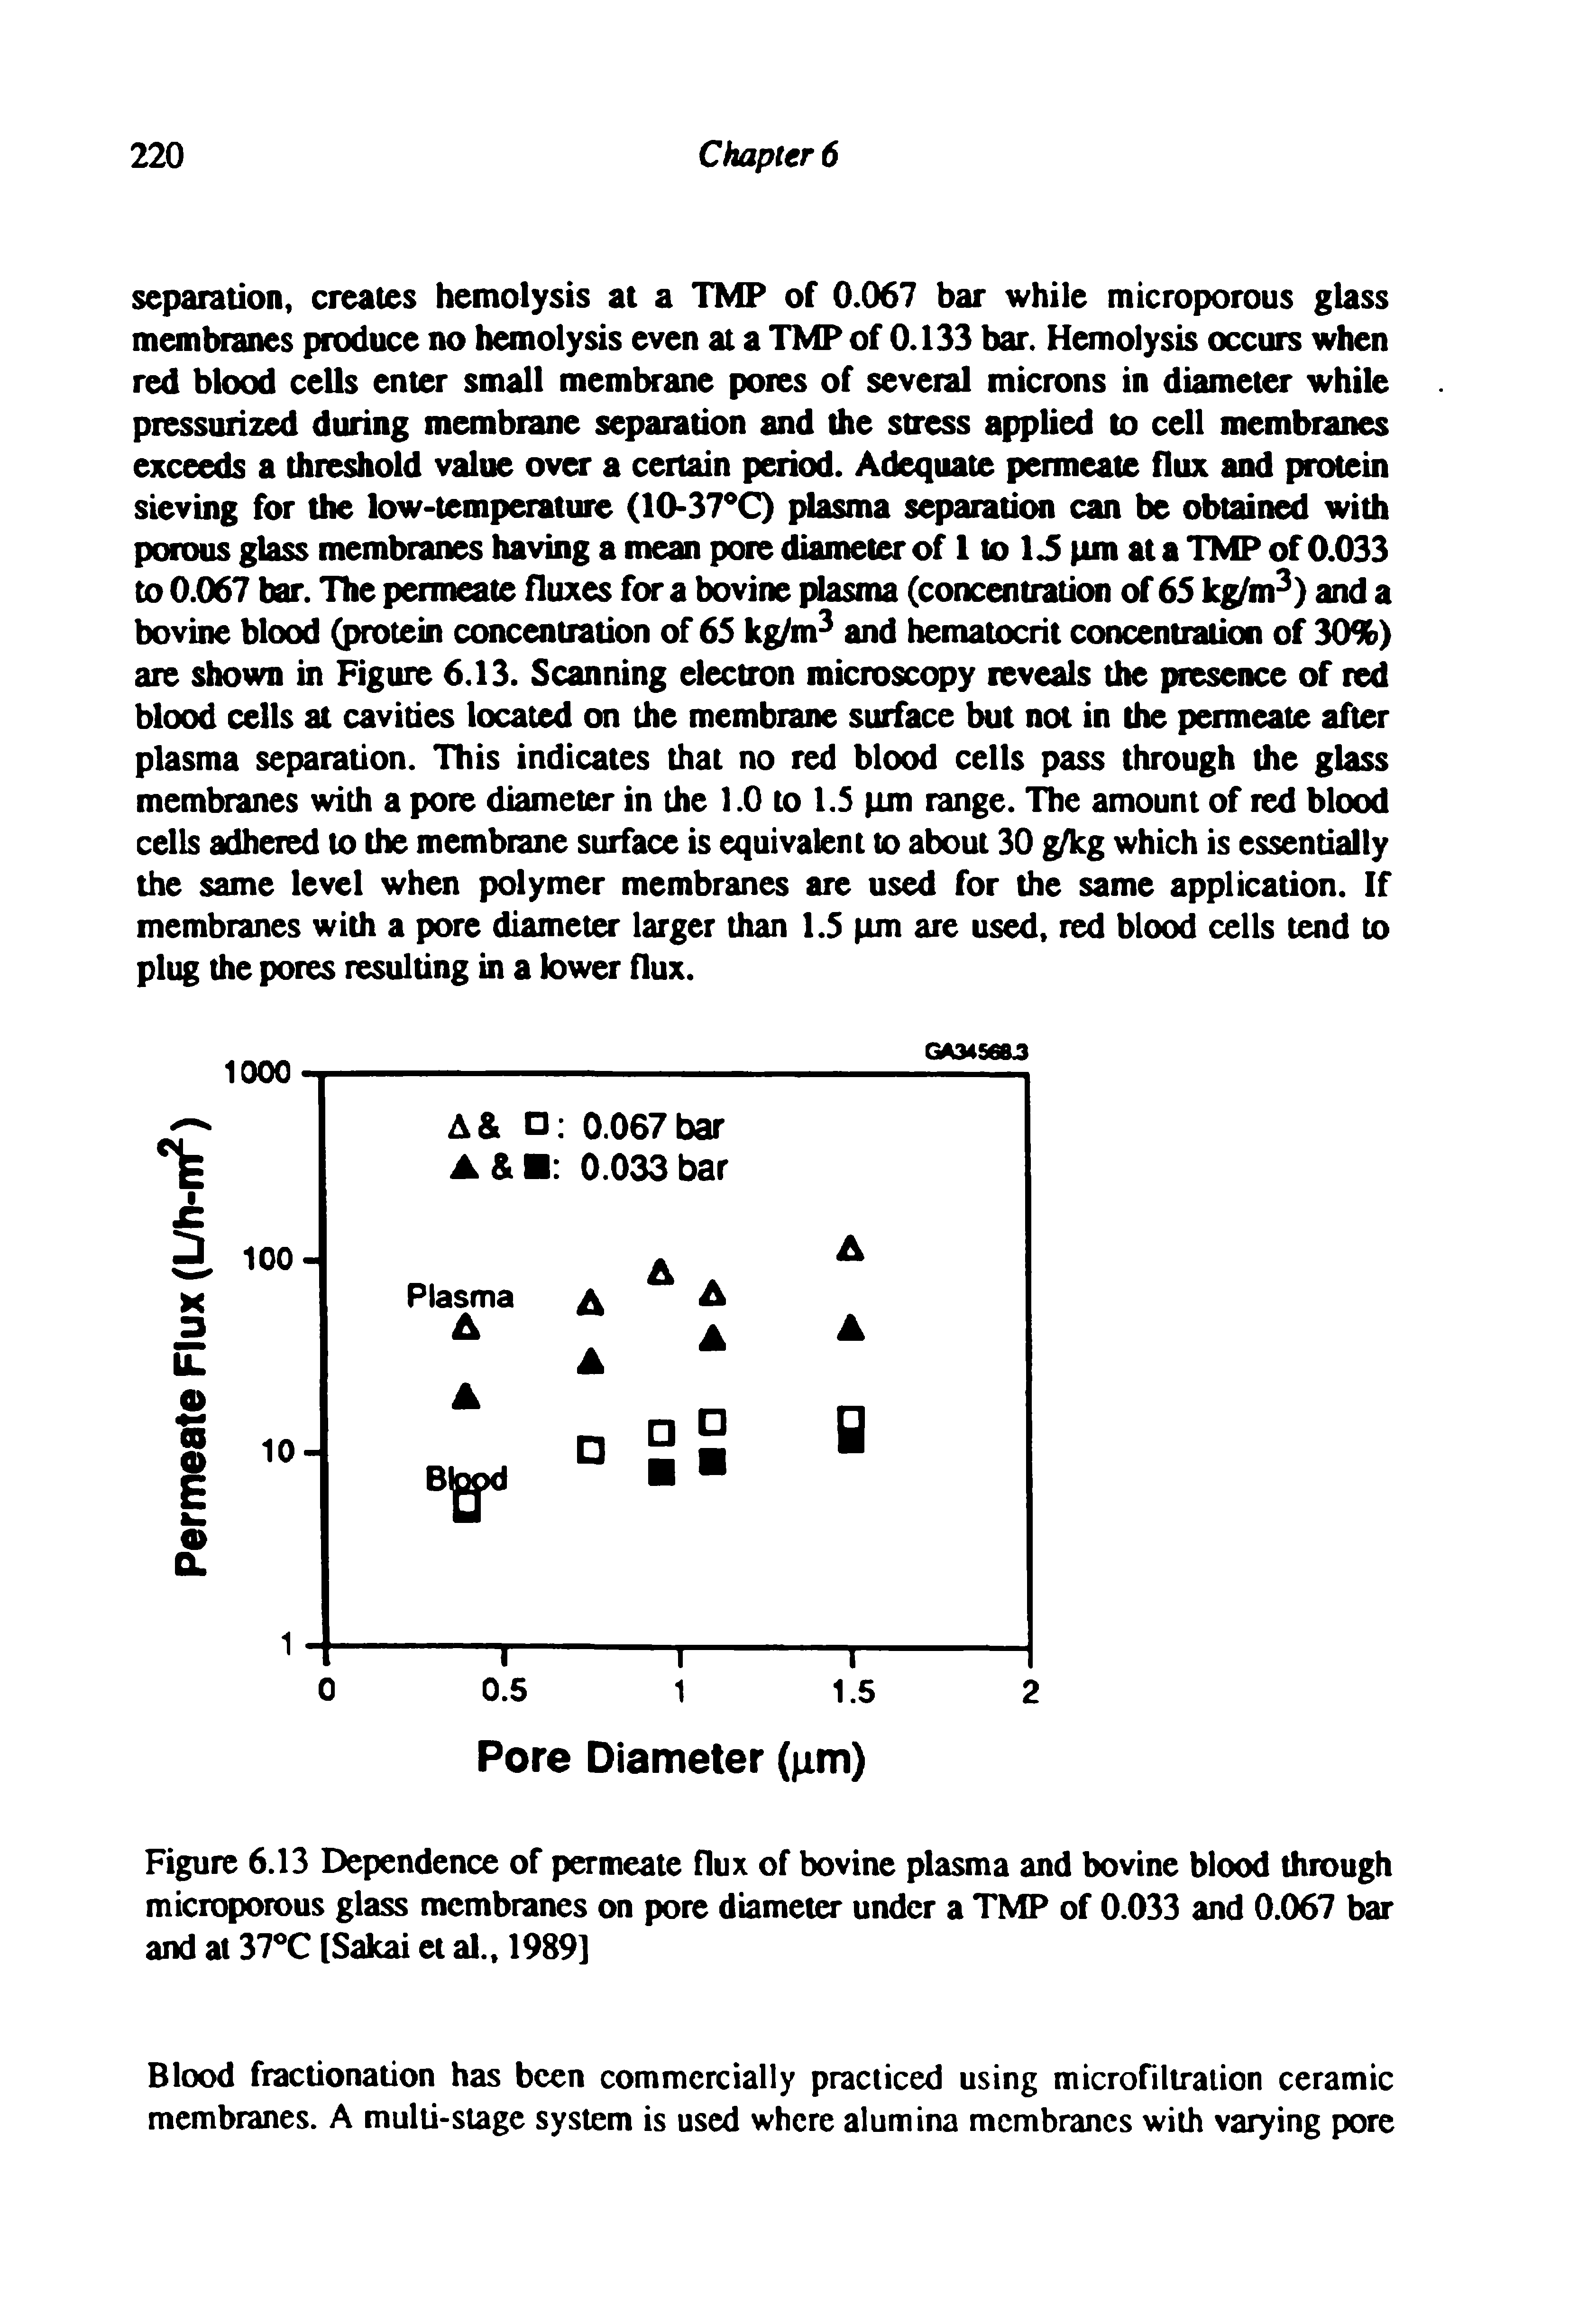 Figure 6.13 Dependence of permeate flux of bovine plasma and bovine blood through microporous glass membranes on pore diameter under a TMP of 0.033 and 0.067 bar and at 37X (Sakai et al., 1989]...